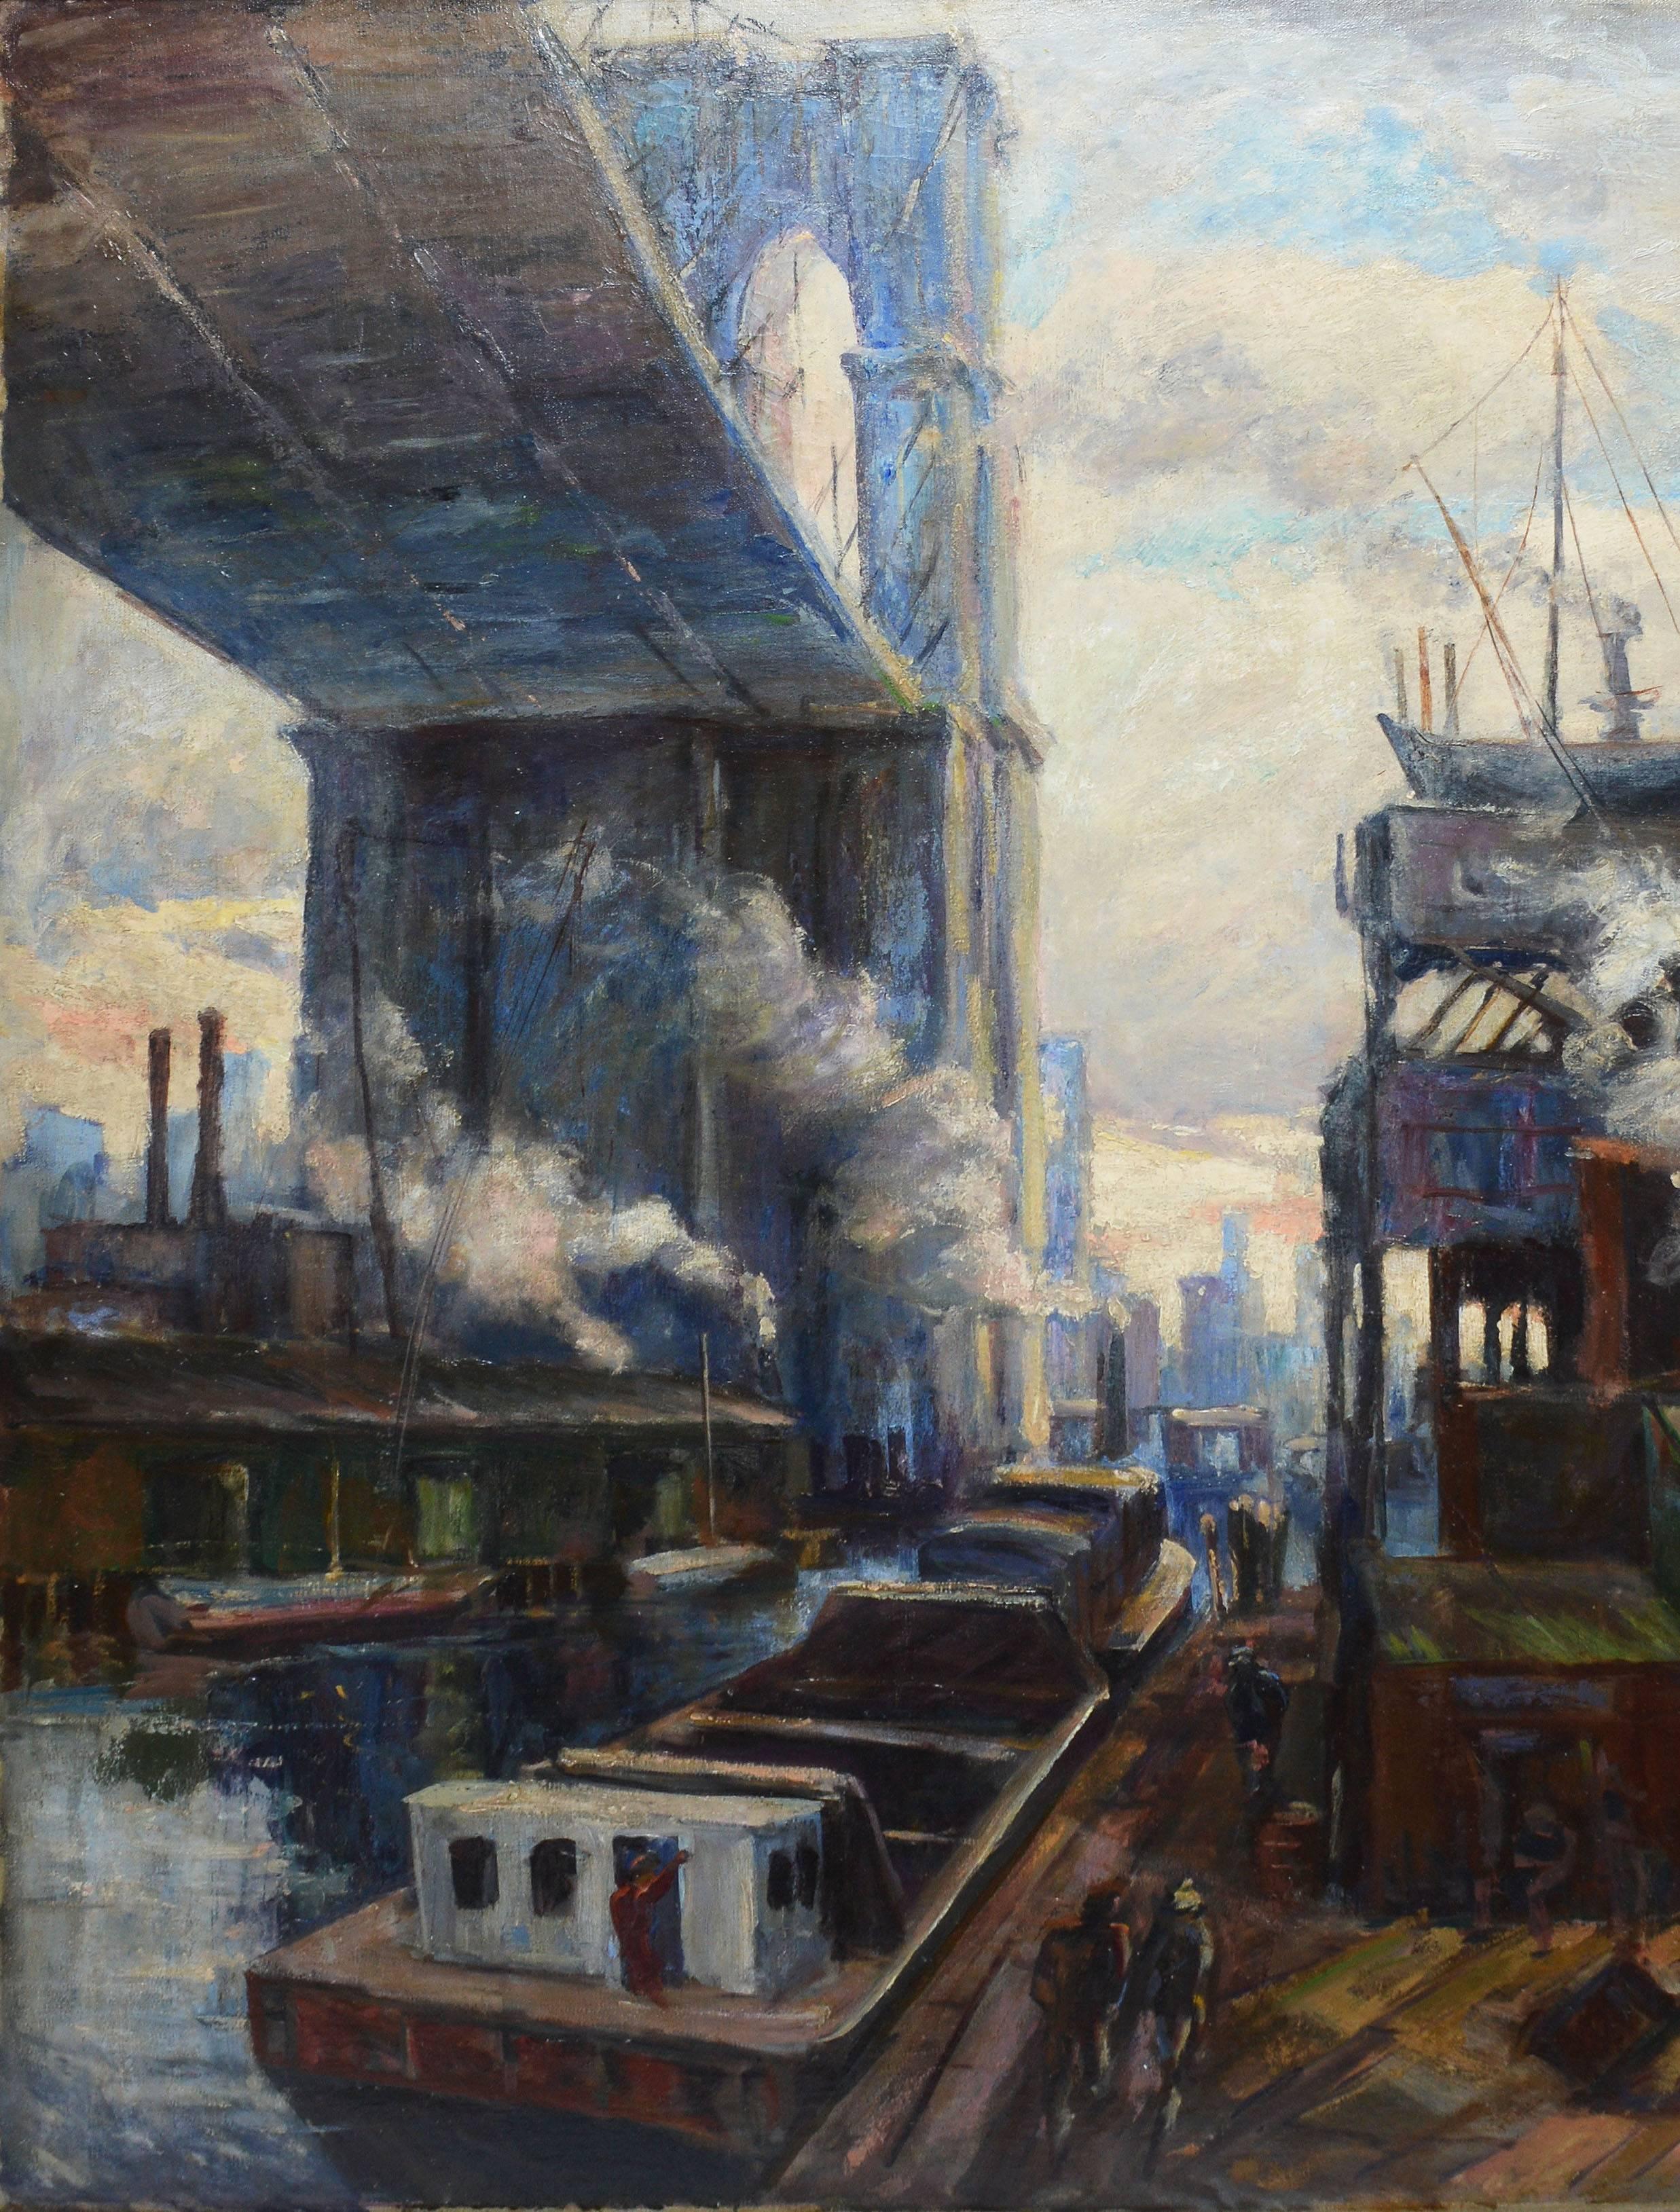 Impressionist oil painting of the Brooklyn Bridge by Sebastian Mineo.  Oil on canvas, circa 1920.  Signed lower right, 